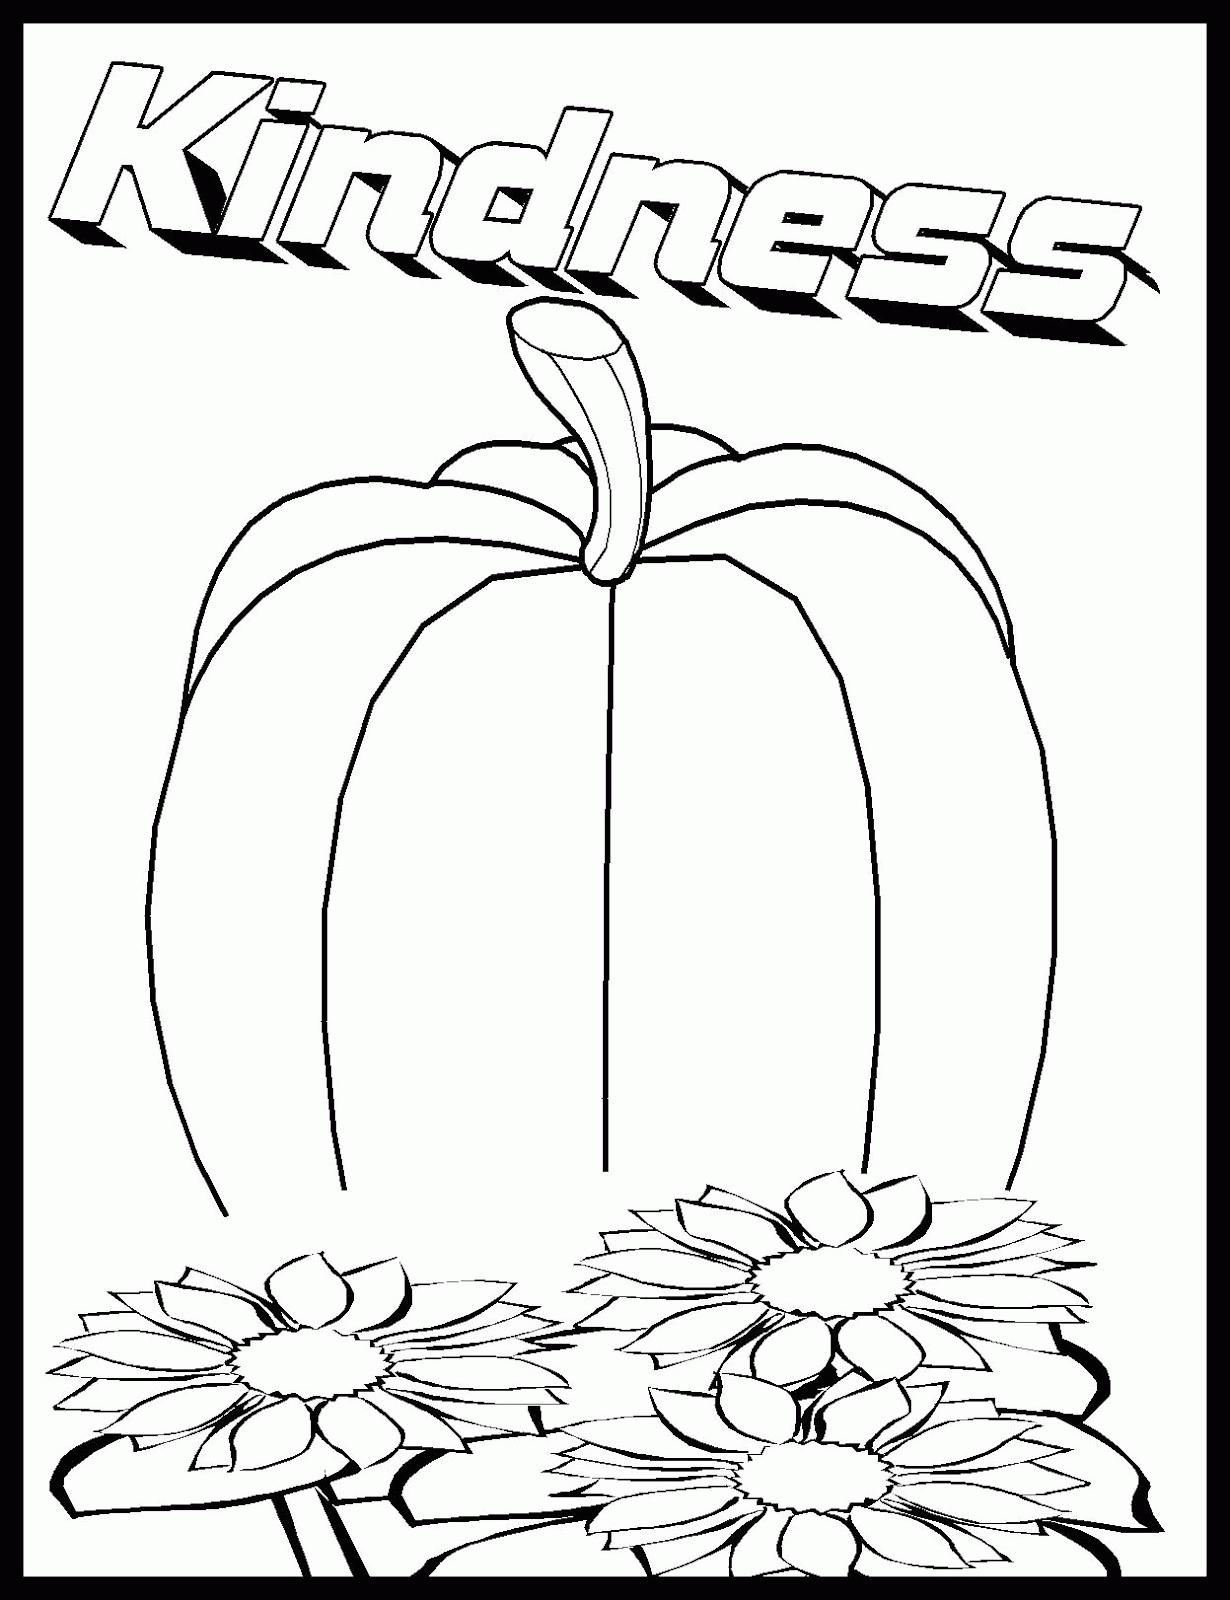 Kindness| Coloring Pages for Kids | Free coloring pages